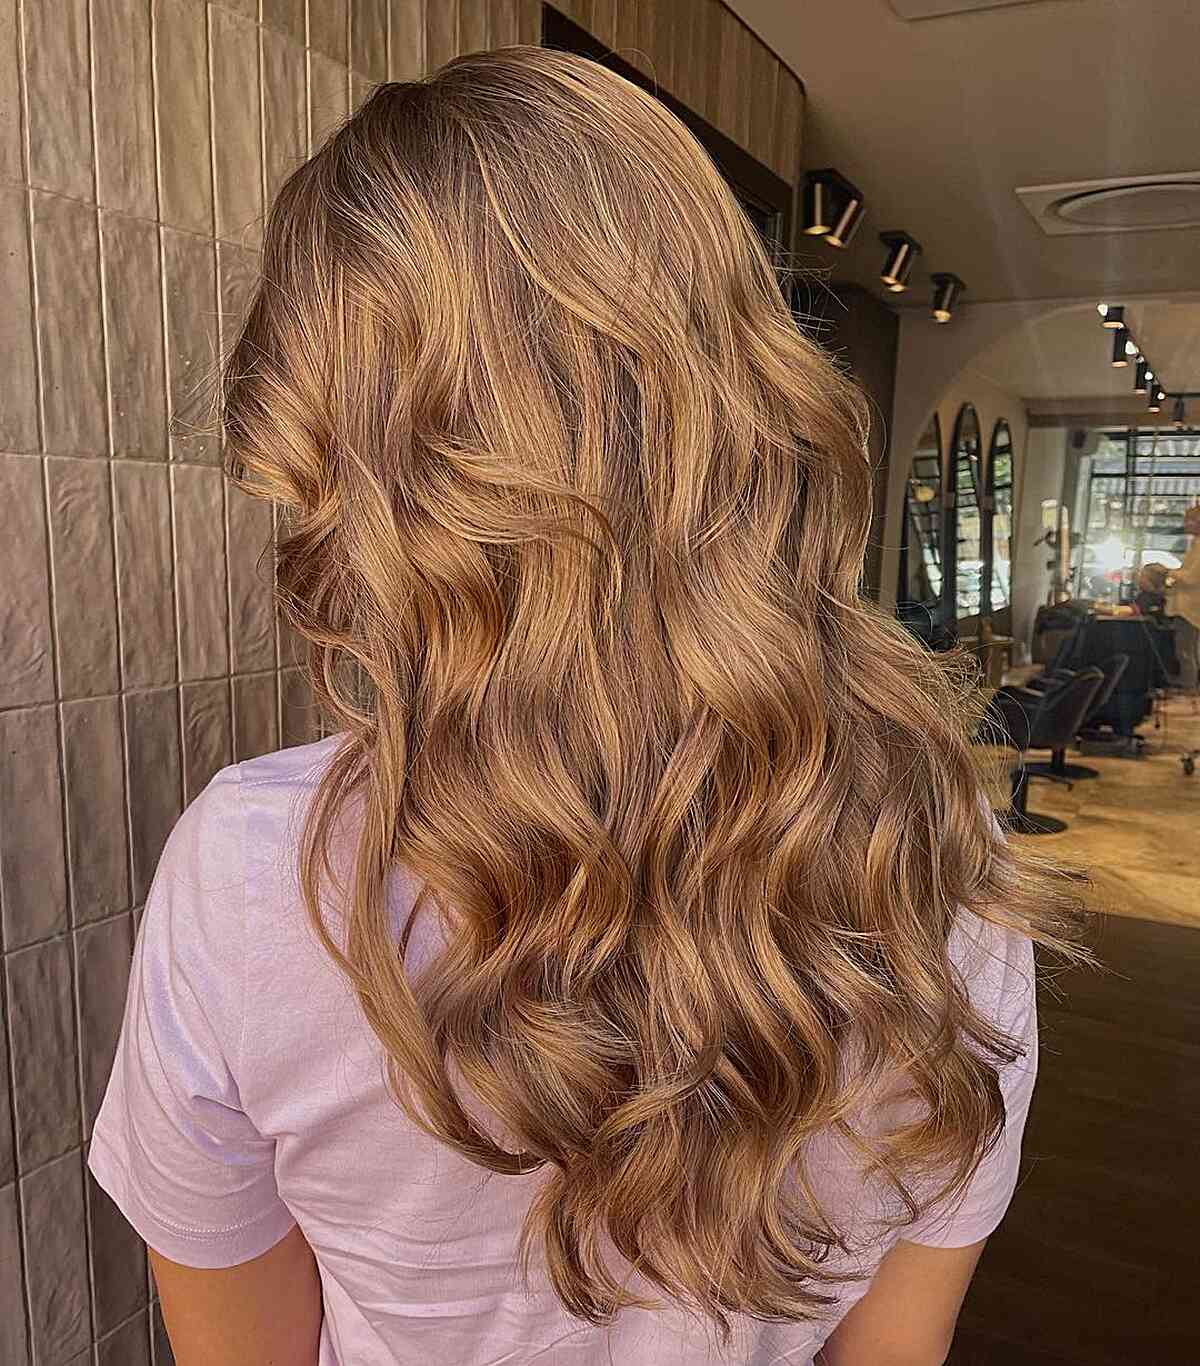 Light Golden Brown Hair with Dark Roots on Wavy Layered Hair